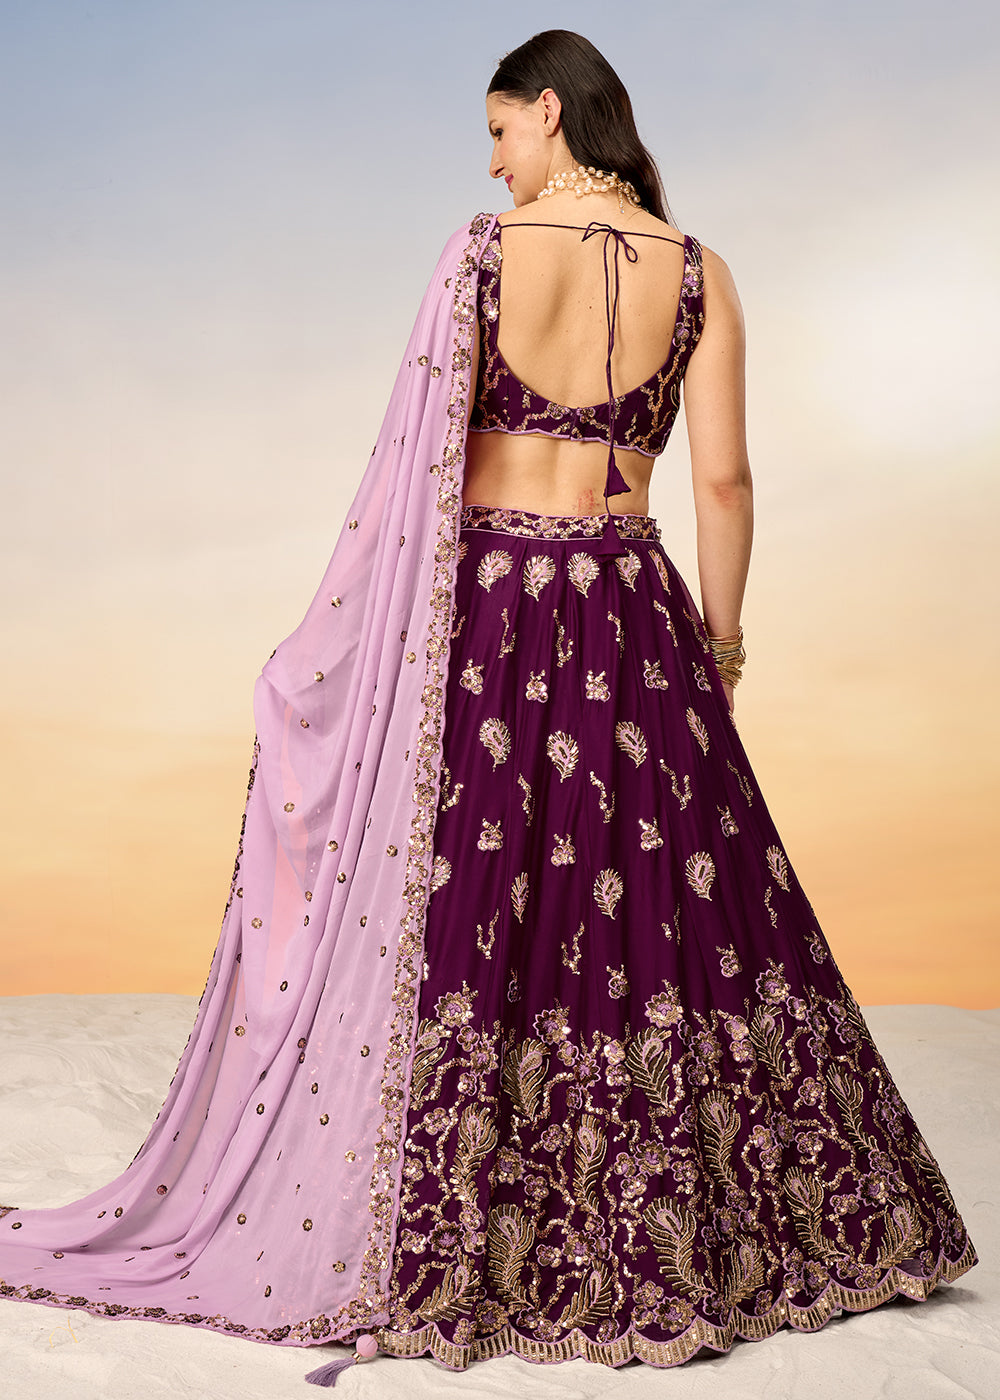 Buy Now Pretty Burgundy Sequins Embroidered Designer Lehenga Choli Online in USA, UK, Canada & Worldwide at Empress Clothing.